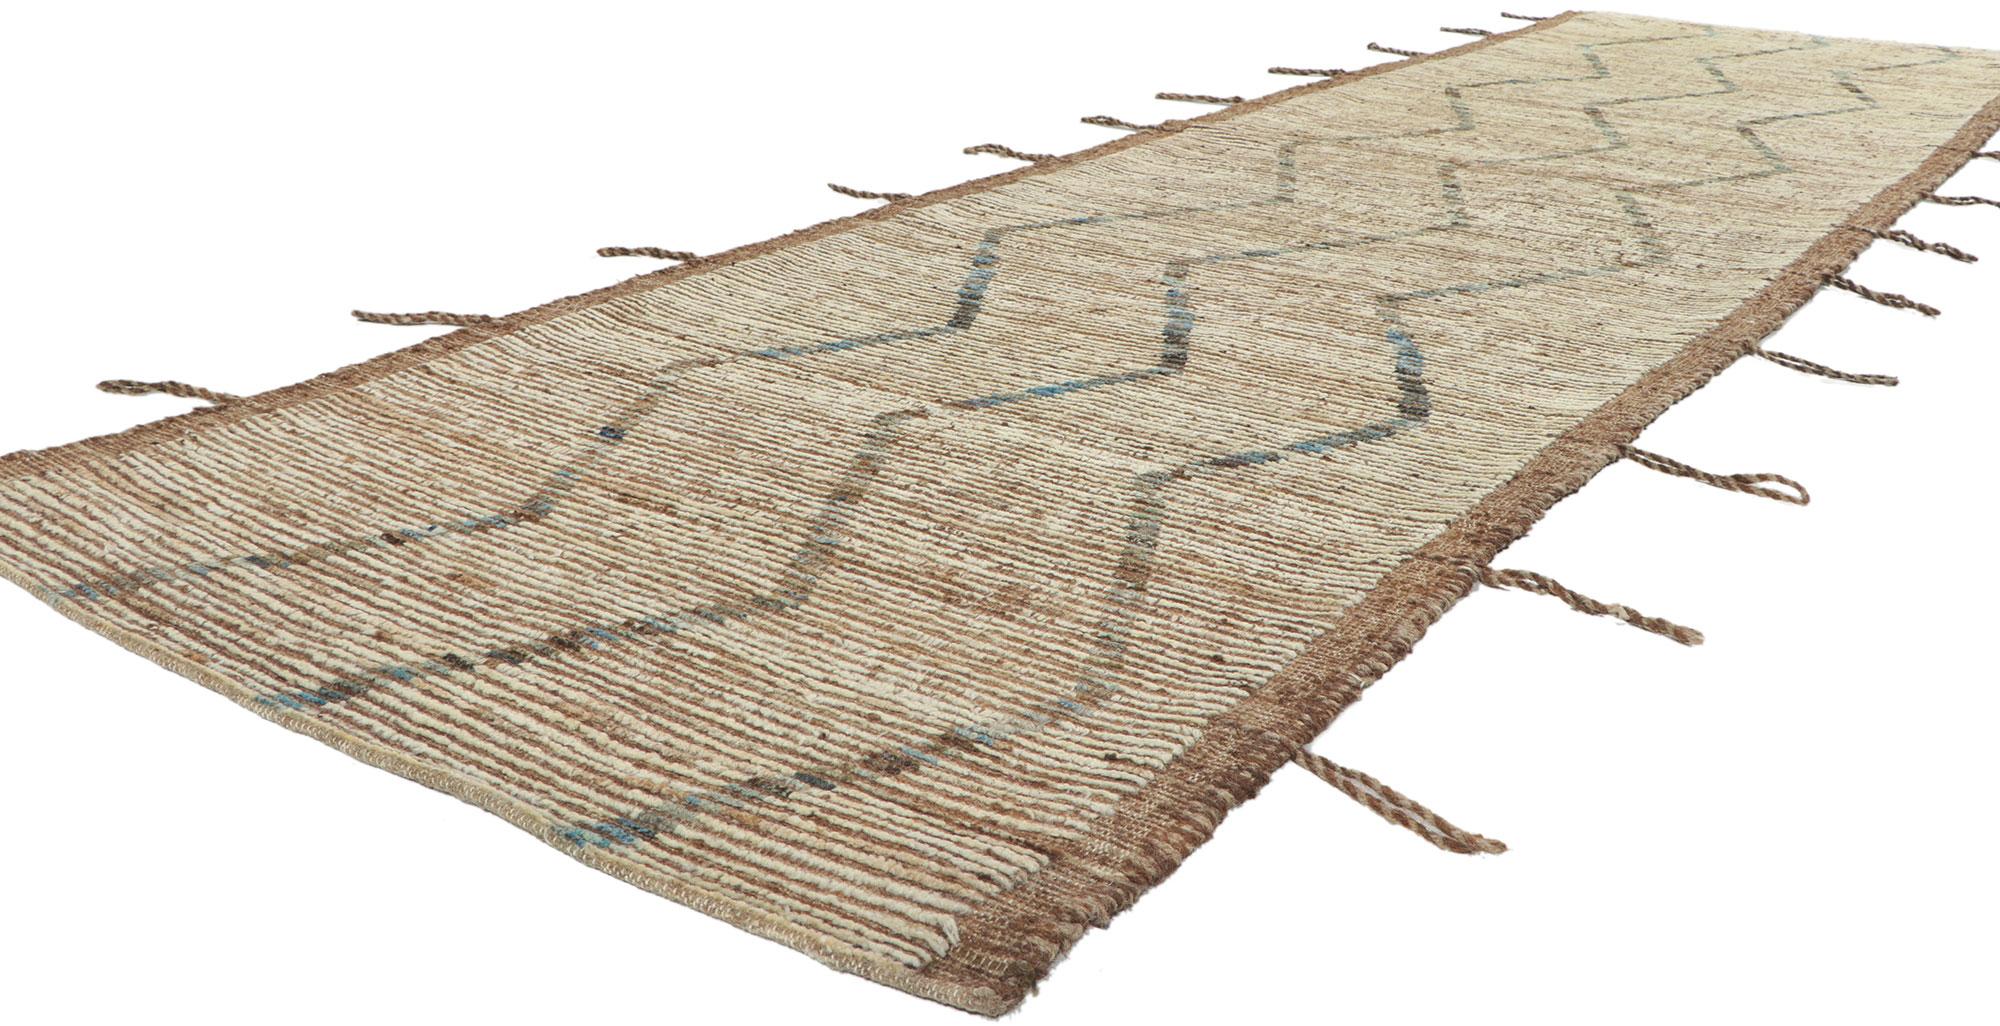 80776 New Contemporary Moroccan runner, 03'06 x 12'05. With its modern style, incredible detail and texture, this hand knotted wool contemporary Moroccan runner is a captivating vision of woven beauty. The tribal pattern and earthy colorway woven